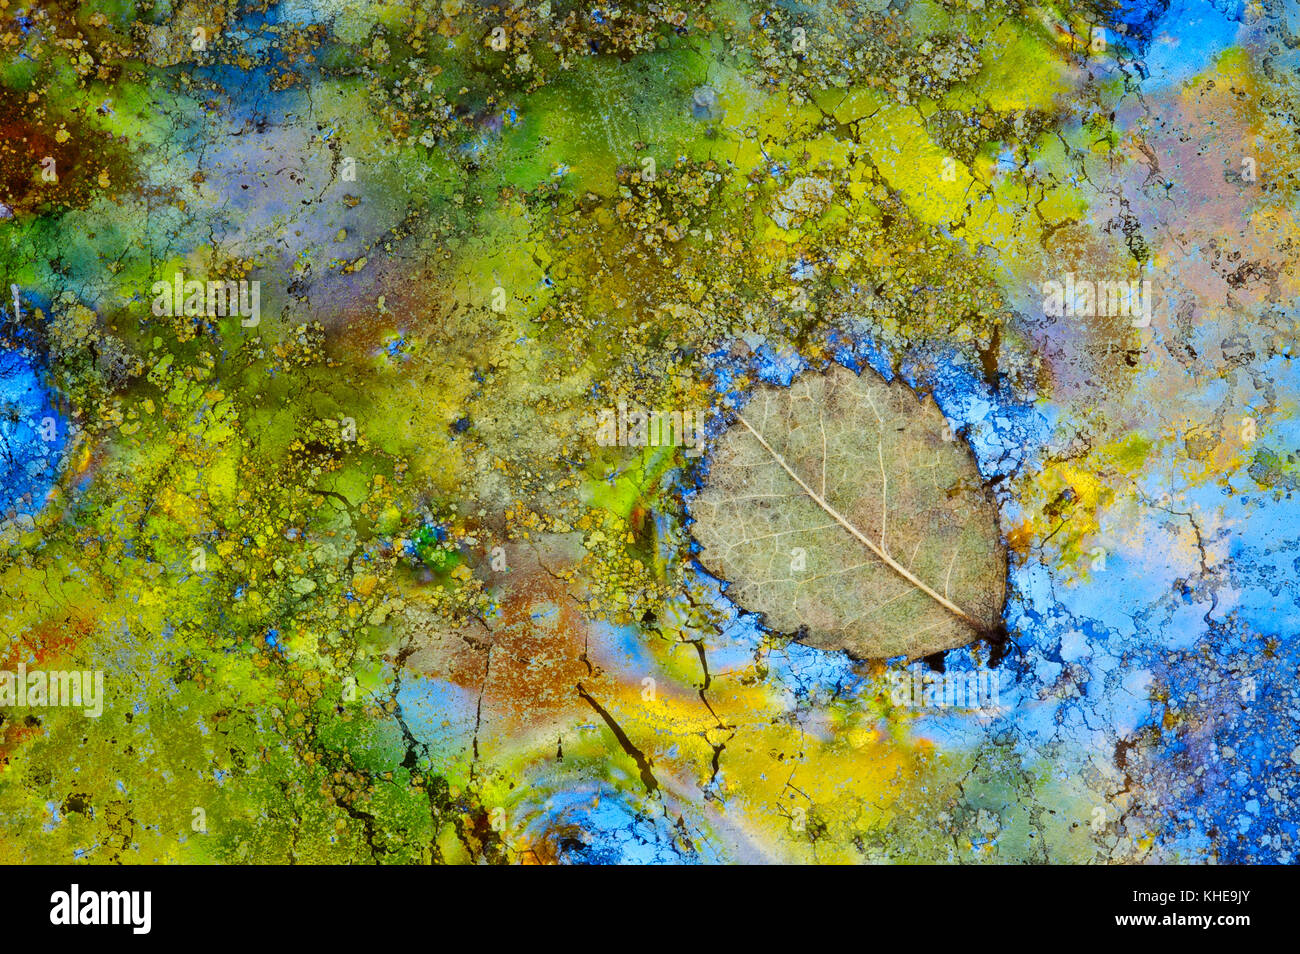 A colorful, vibrant, naturally occurring iron bacteria (Leptothrix discophora) film surrounds a fallen leaf in this local vernal pond Stock Photo